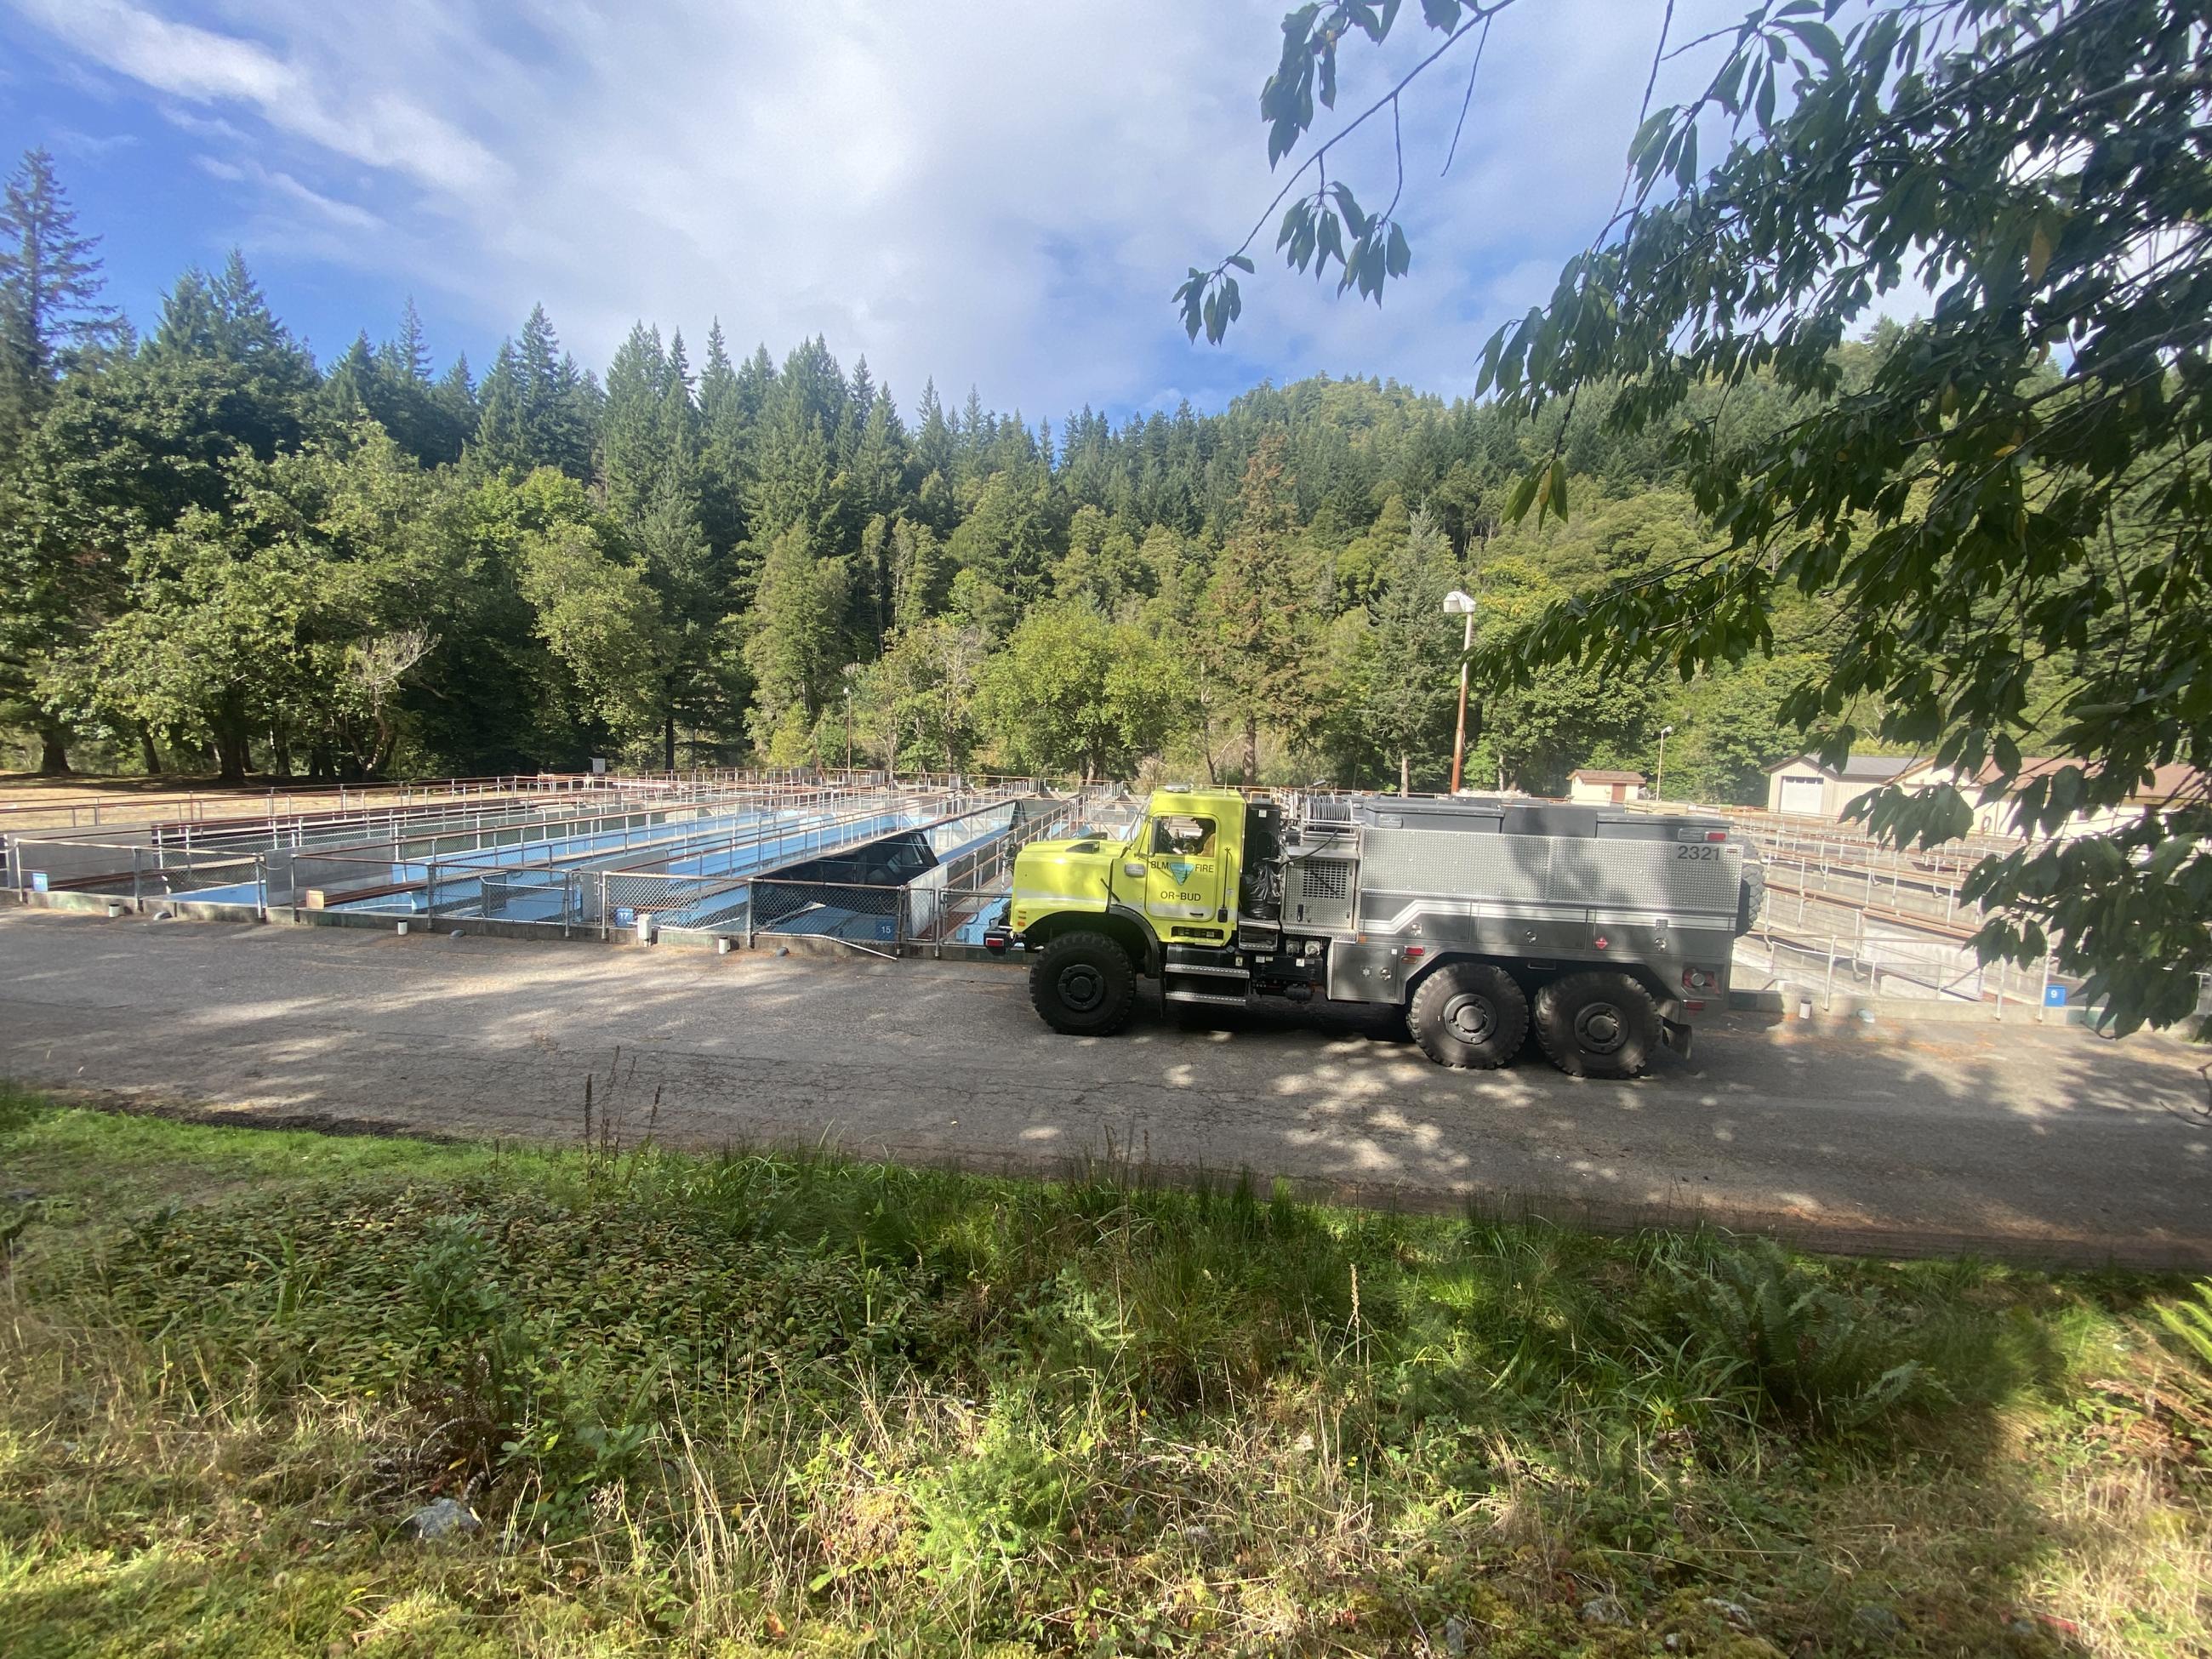 A large yellow fire engine is parked next to ground tanks at a fish hatchery